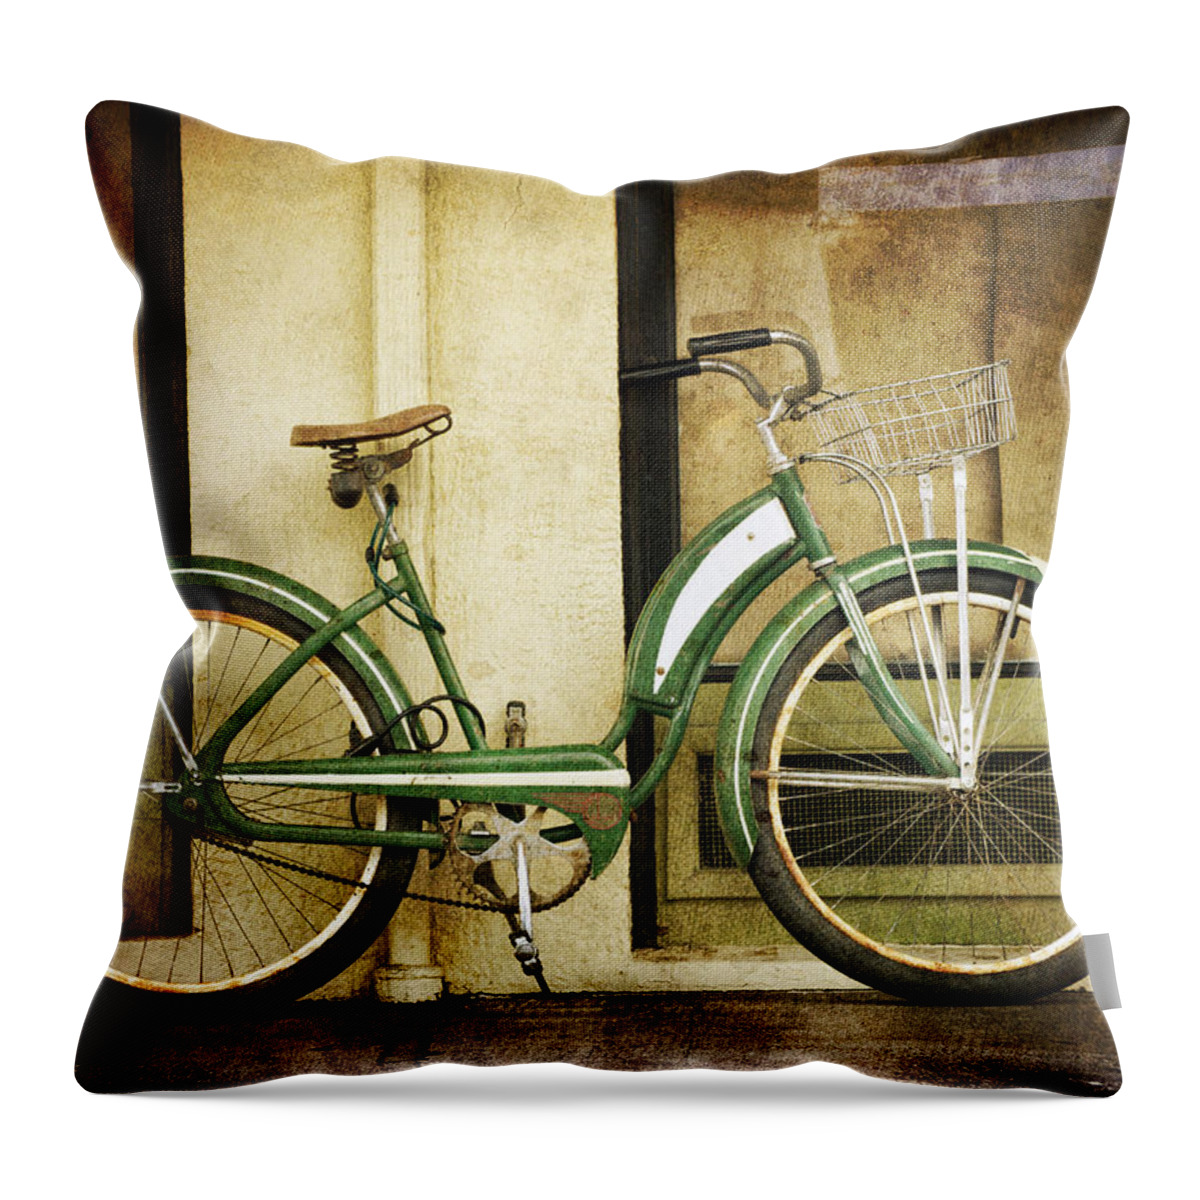 Bike Throw Pillow featuring the photograph Green Bicycle by Carol Leigh